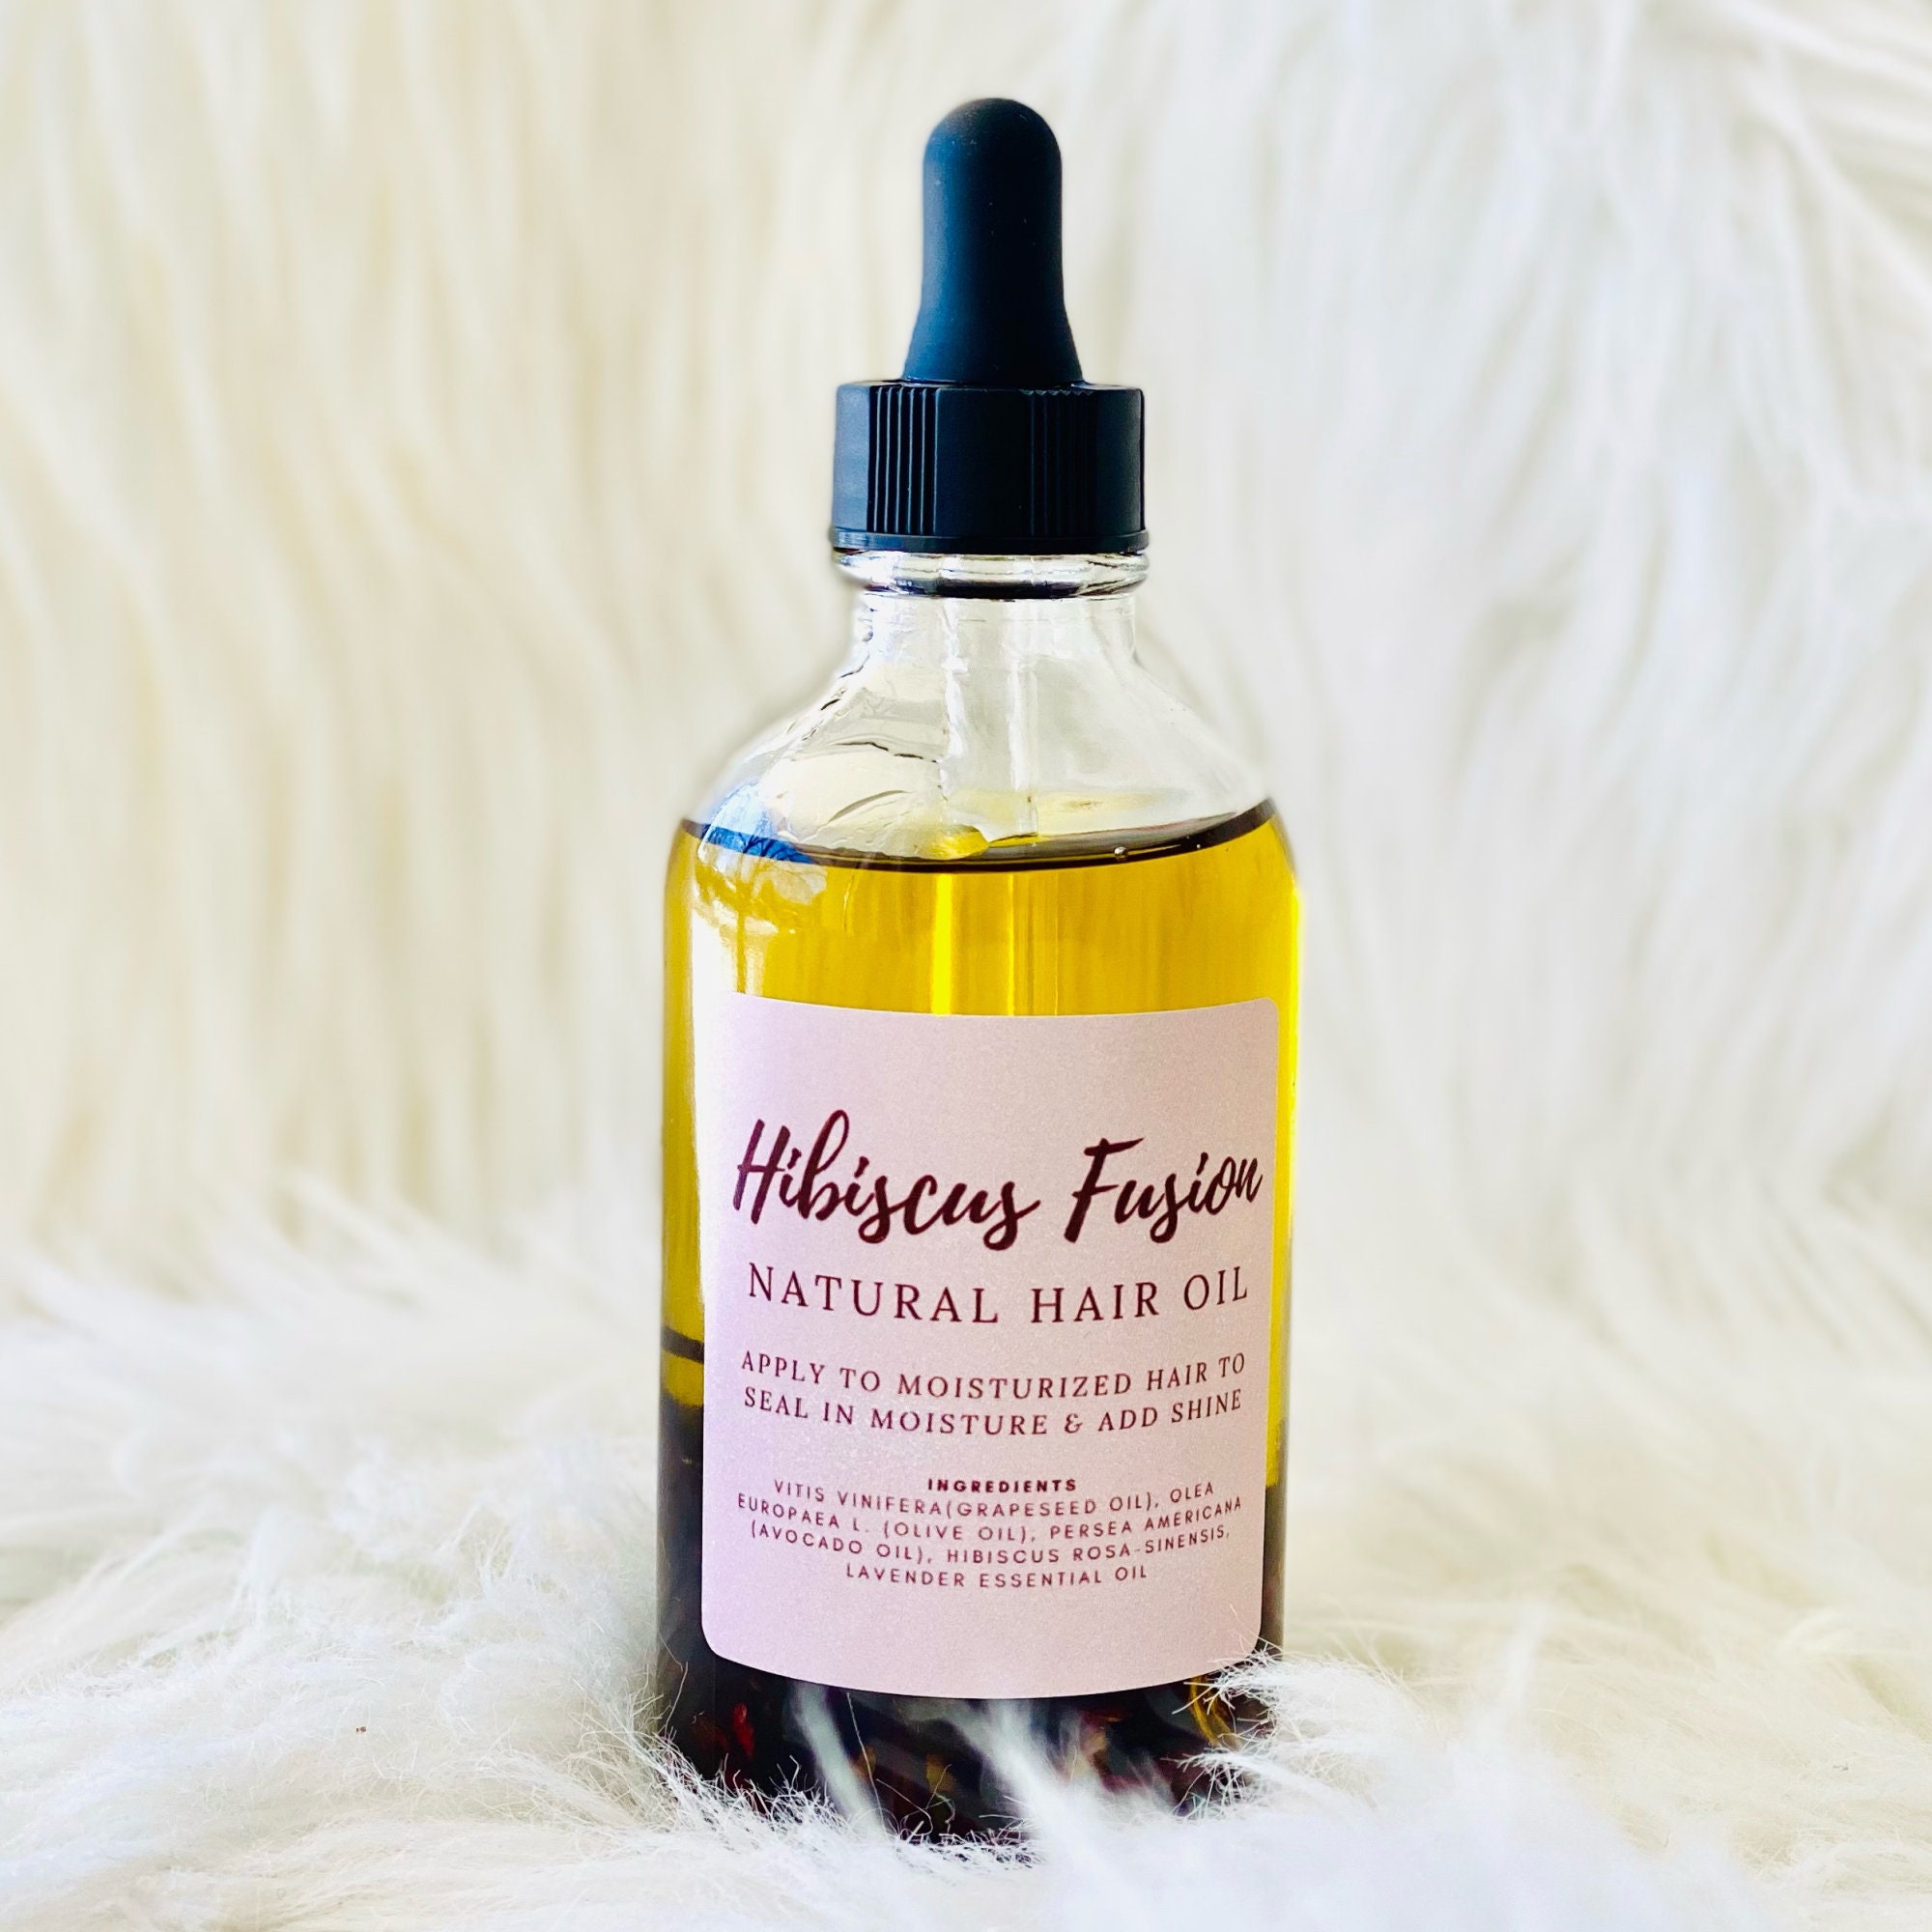 Hibiscus Fusion Hair Oil Lock-in Moisture and Add Shine - Etsy